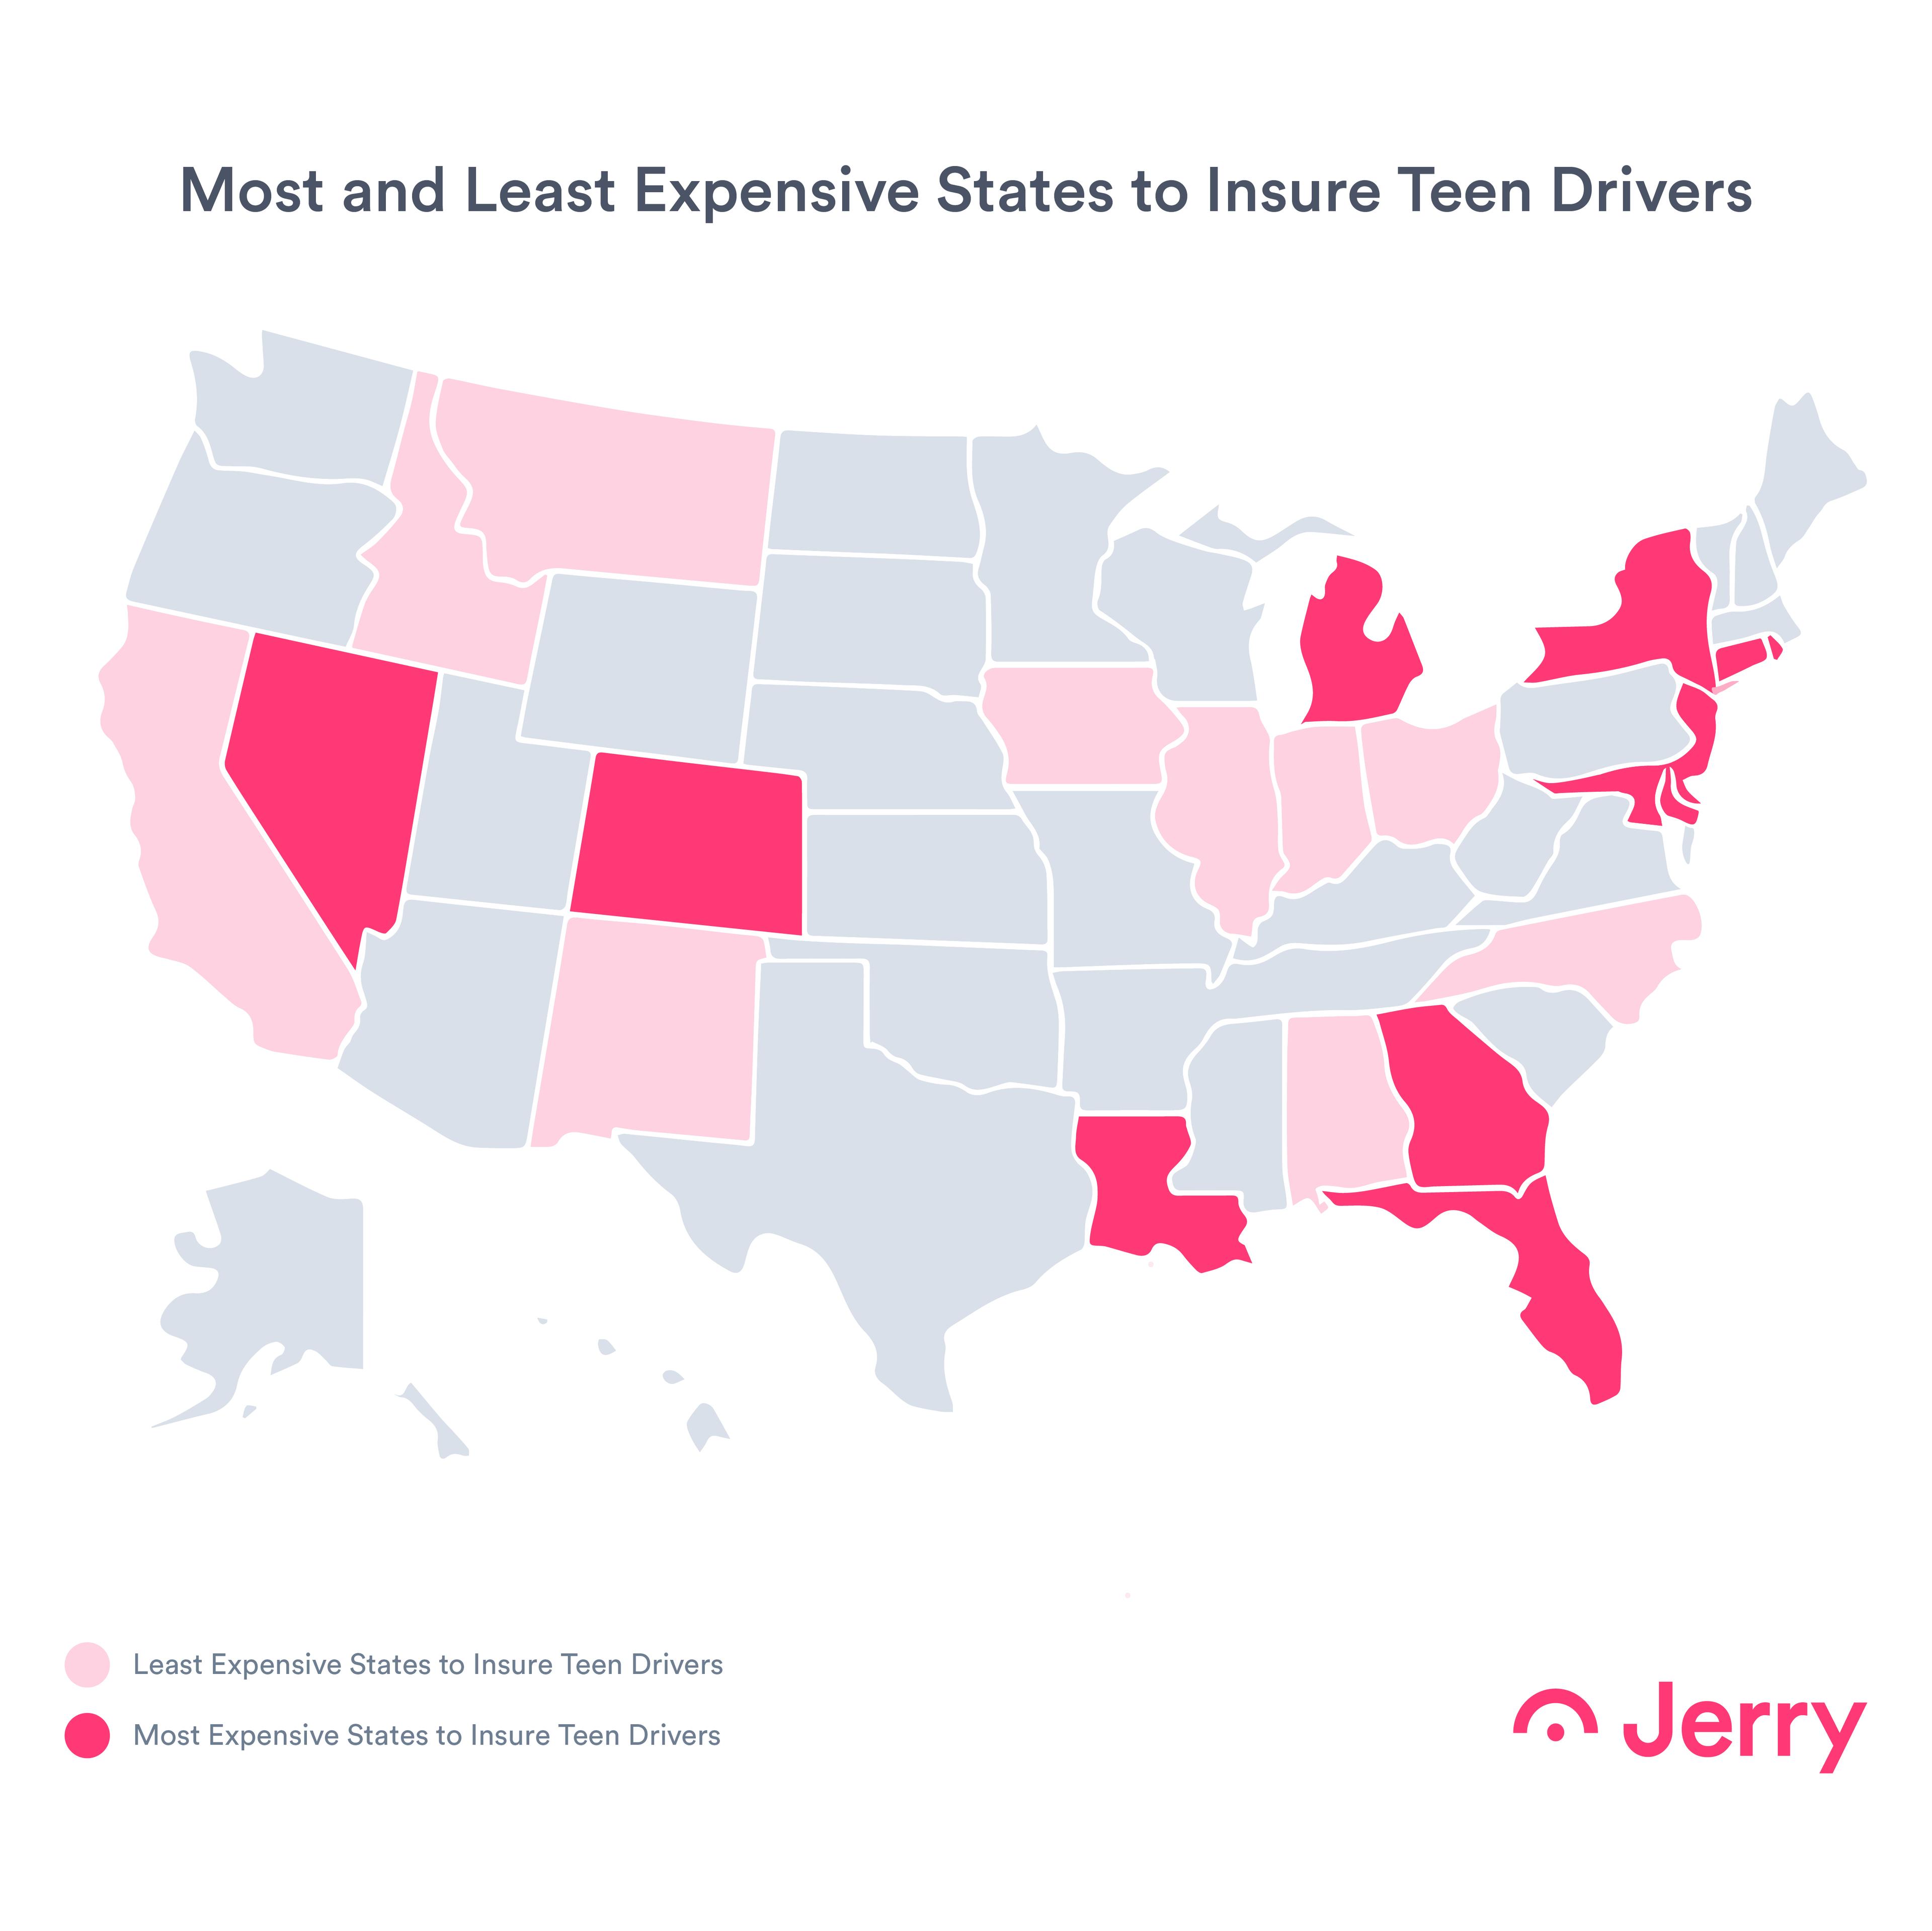 A map showing the most and least expensive states for teen driver car insurance